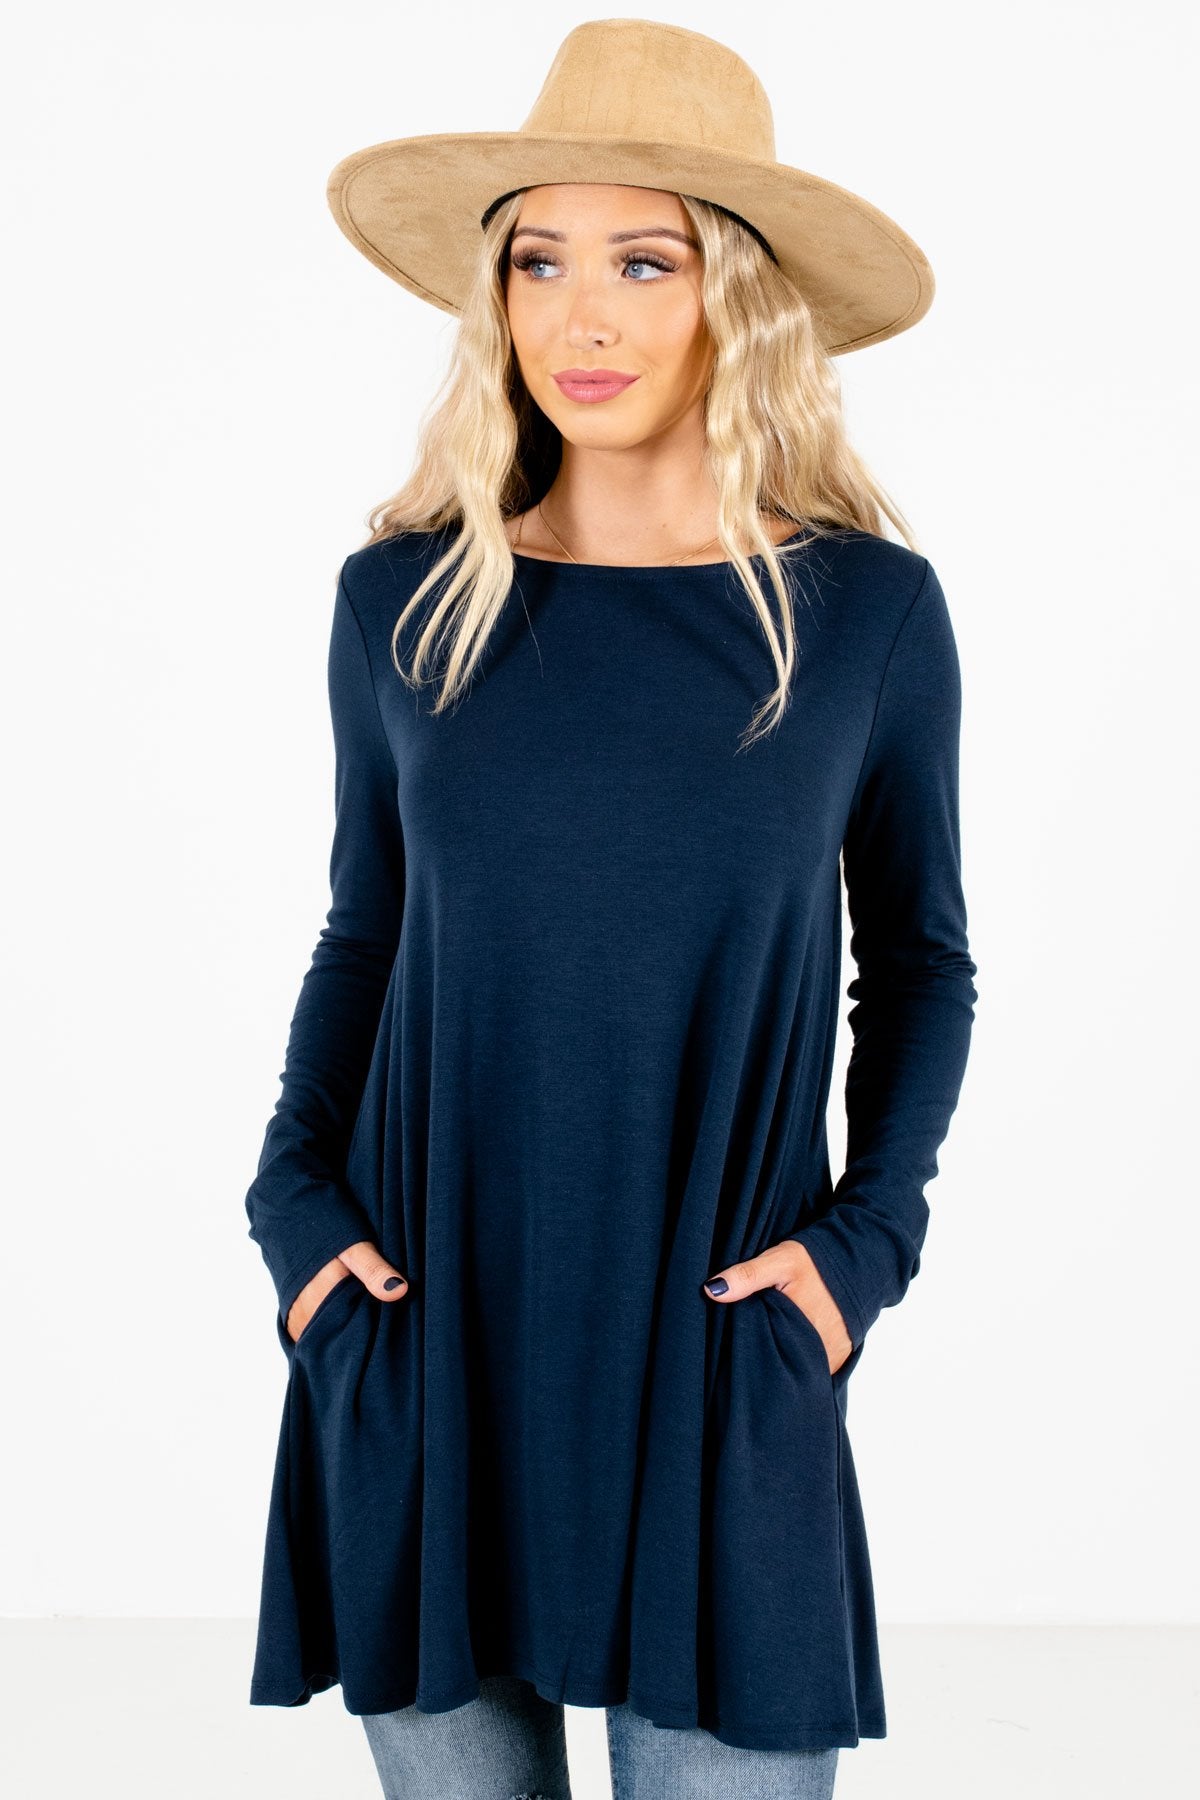 Navy Blue Boutique Long Sleeve Tops for Women